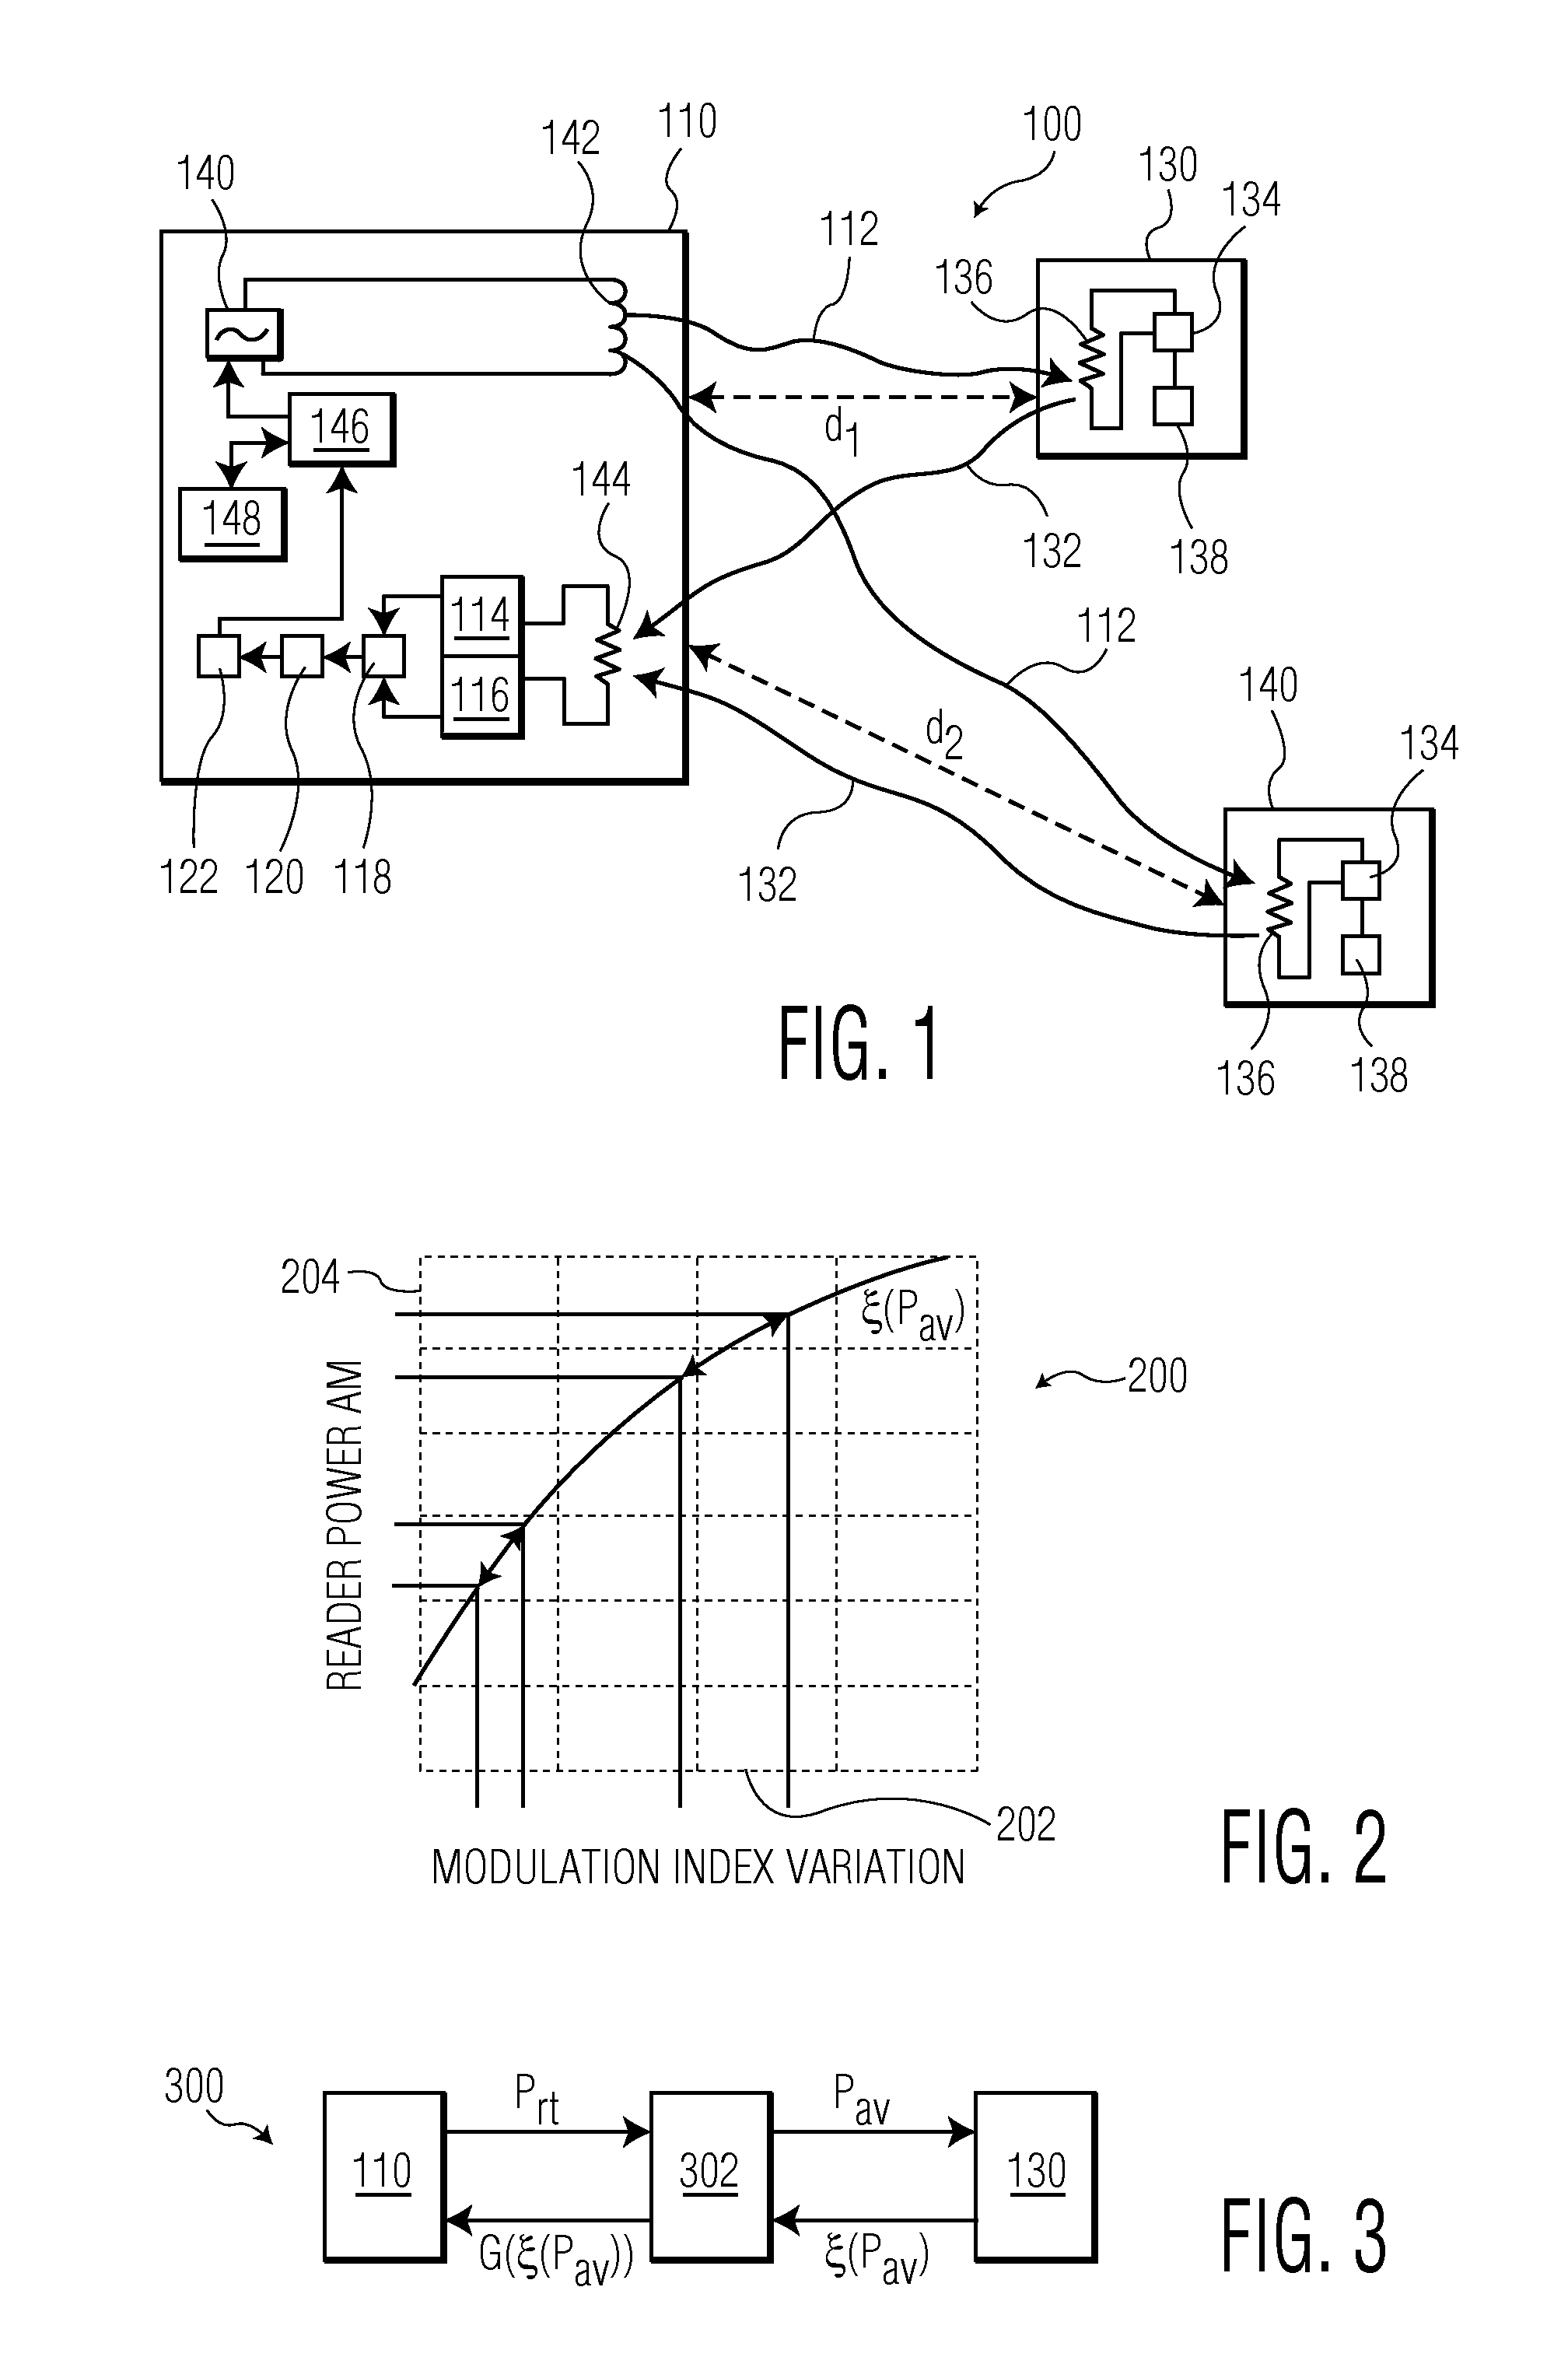 System for reading information transmitted from a transponder